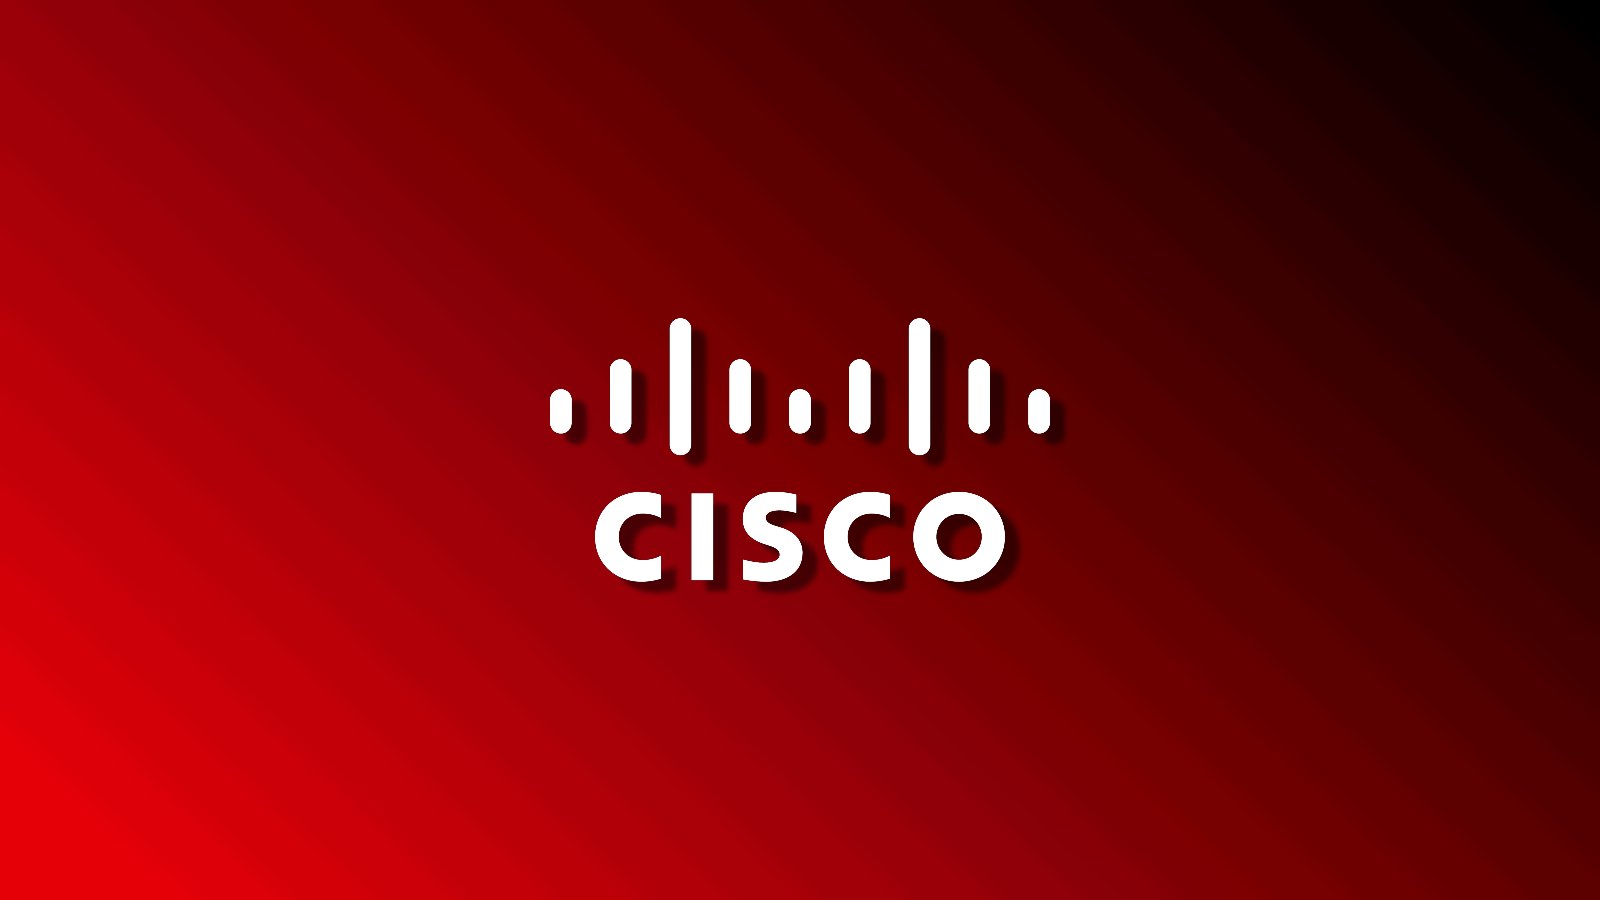 Cisco urges admins to fix IOS software zero-day exploited in attacks – Source: www.bleepingcomputer.com